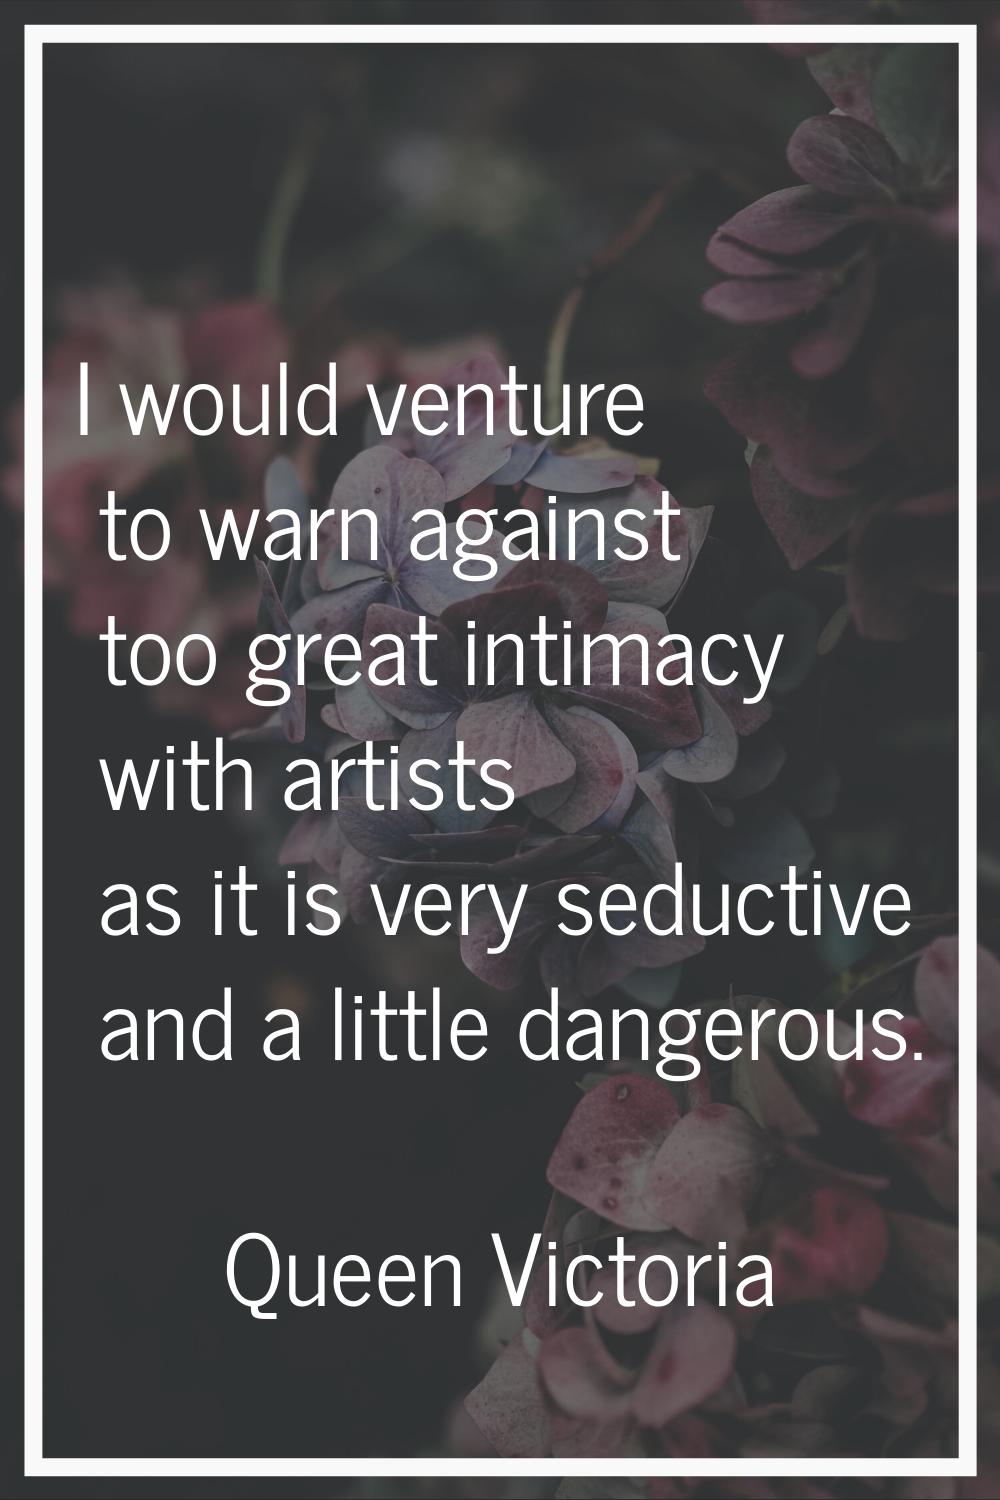 I would venture to warn against too great intimacy with artists as it is very seductive and a littl